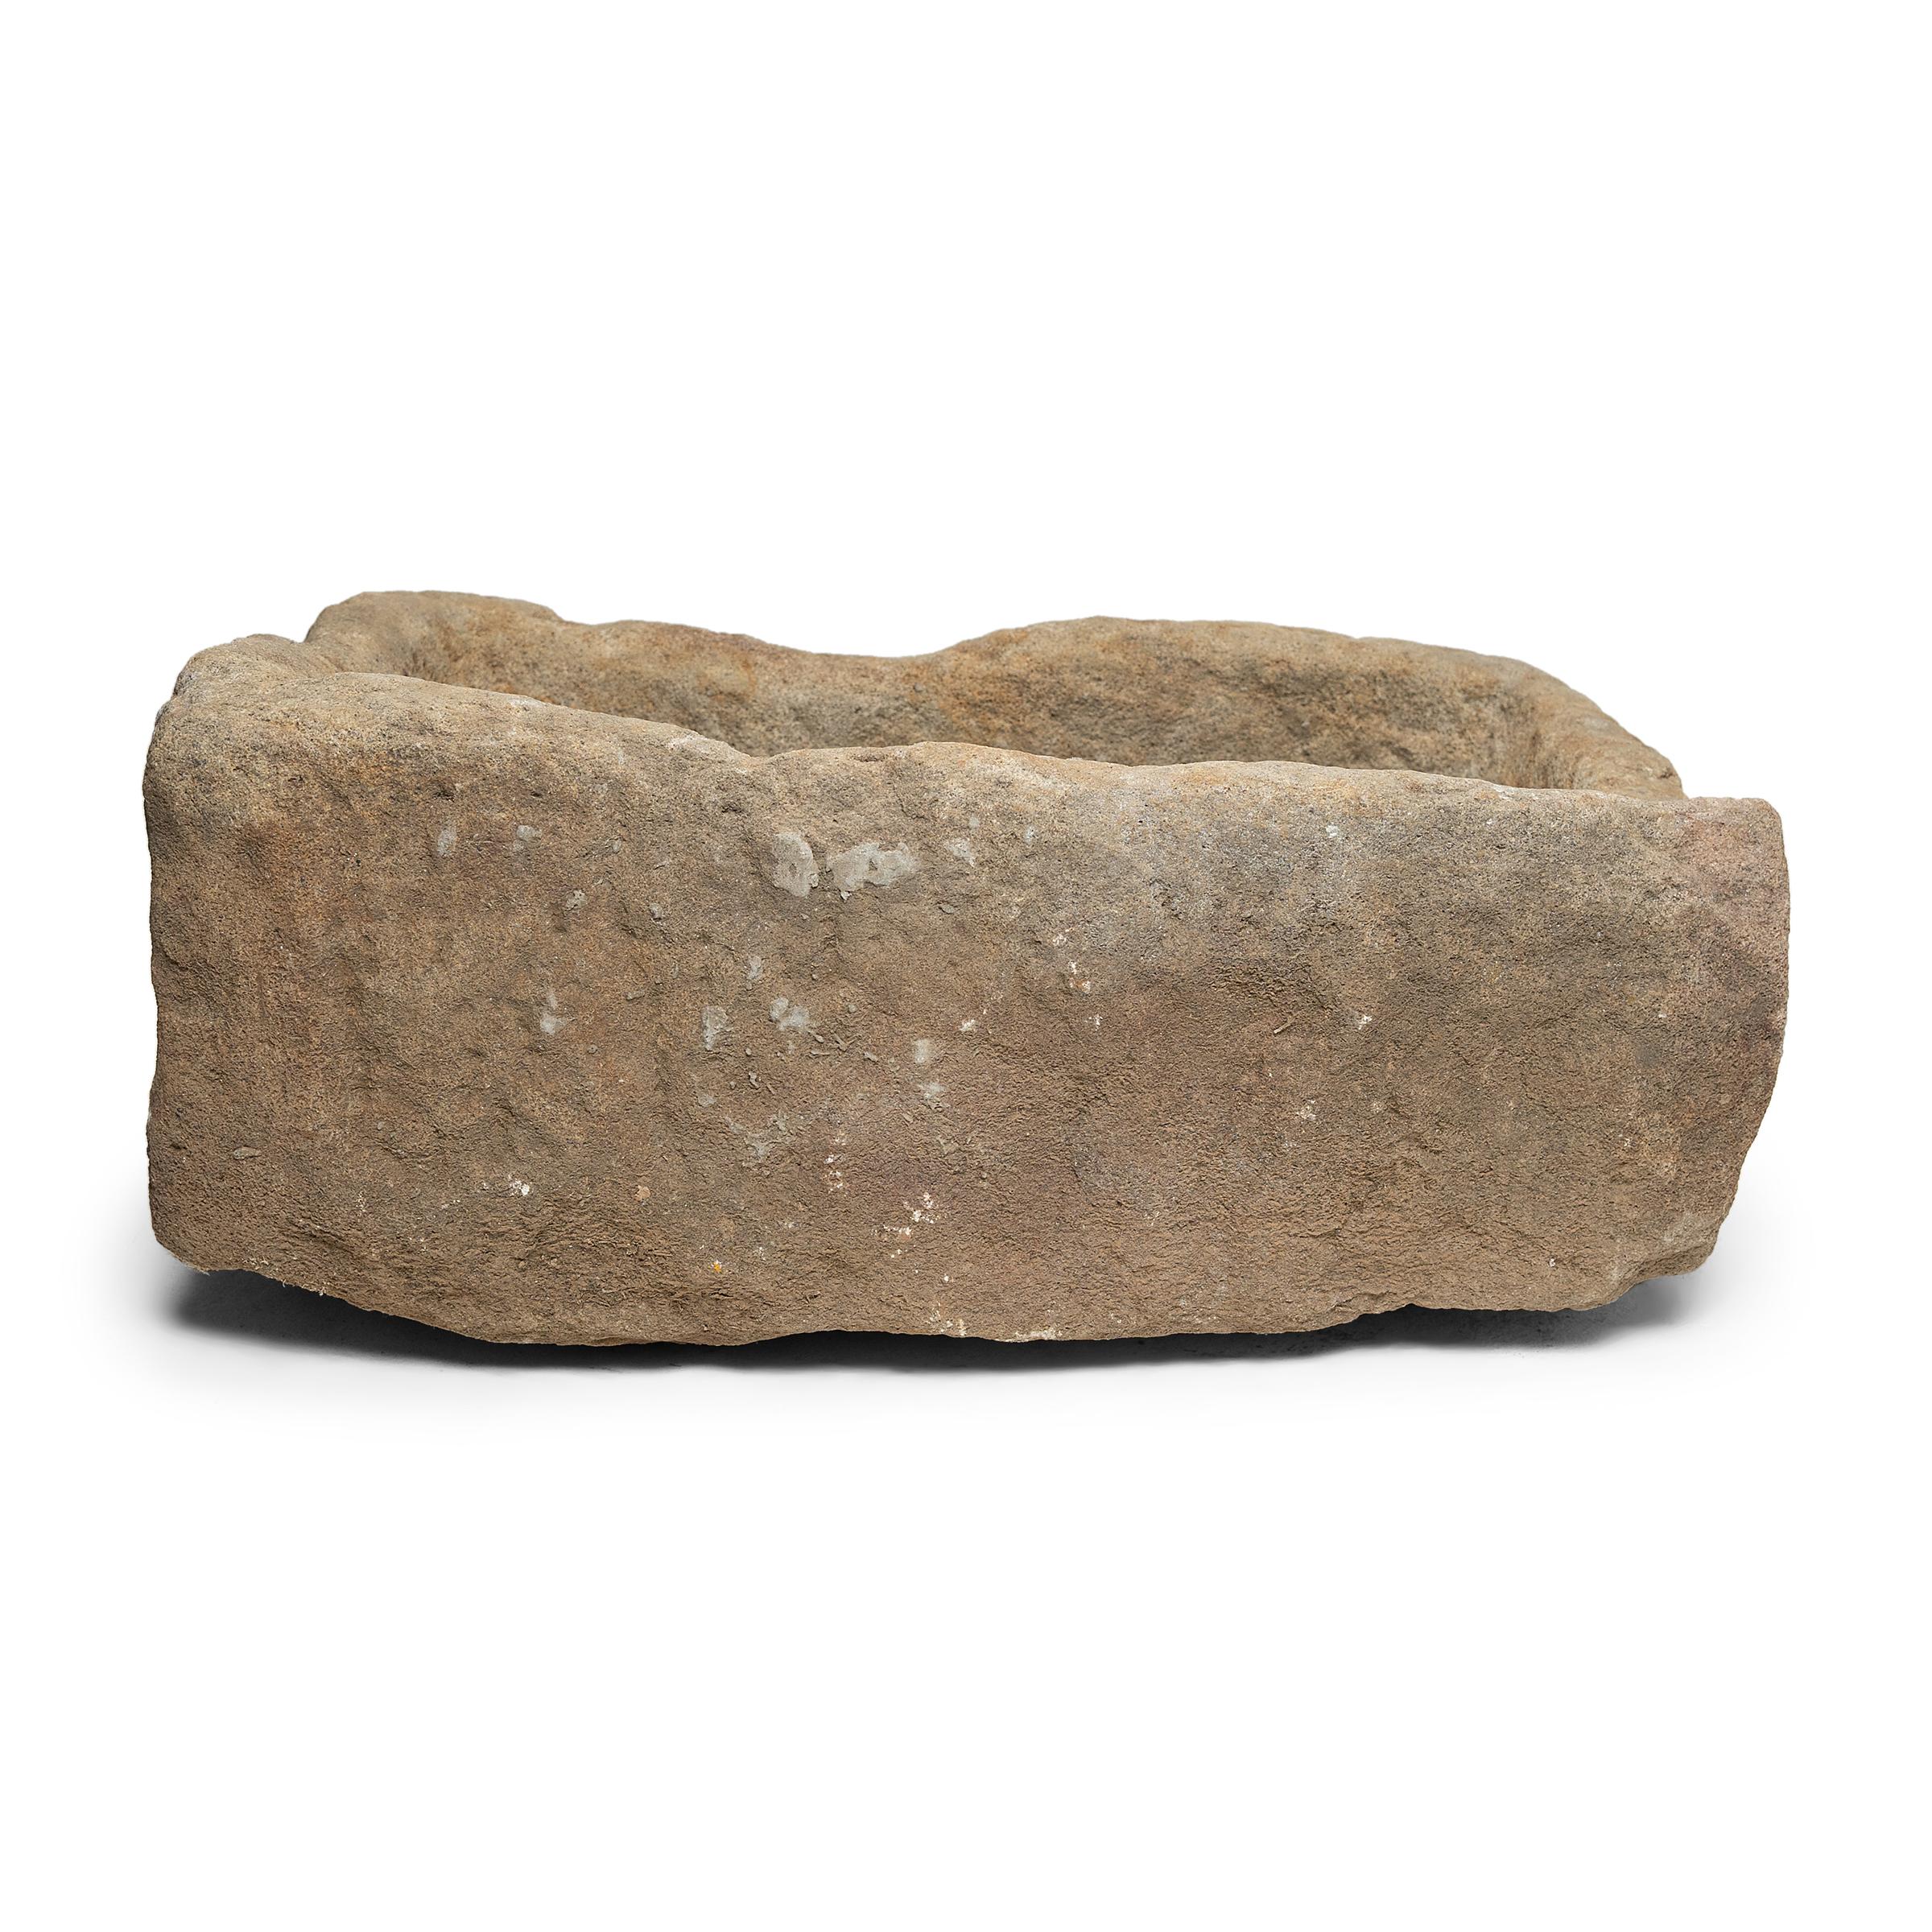 Once used on a Provincial Chinese farm to hold water or animal feed, this turn-of-the-century stone trough is celebrated today for its organic form and rustic authenticity. hand carved from solid limestone, the trough's chiseled surface has